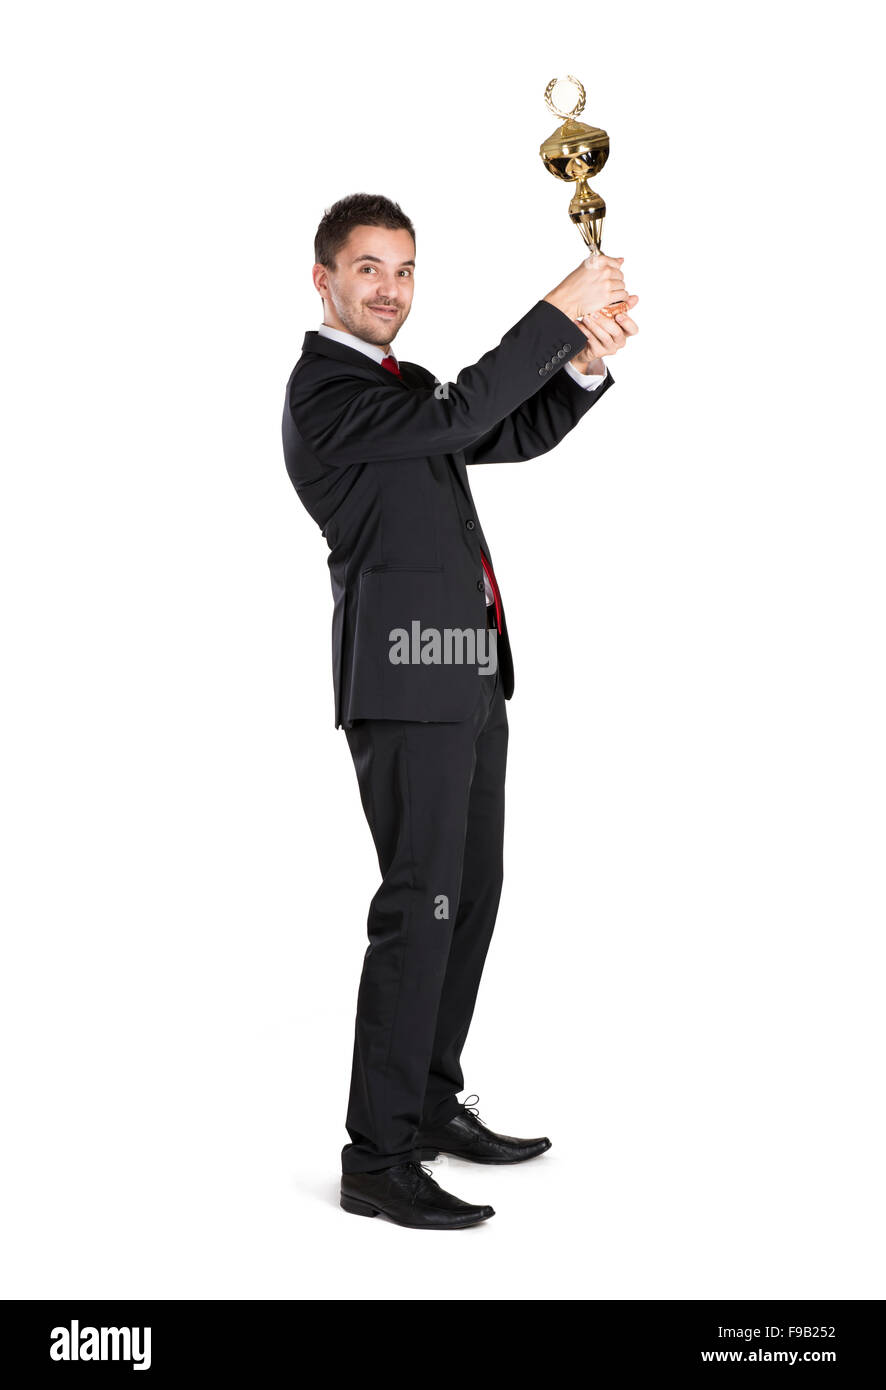 Successful business man is celebrating success on isolated white background Stock Photo